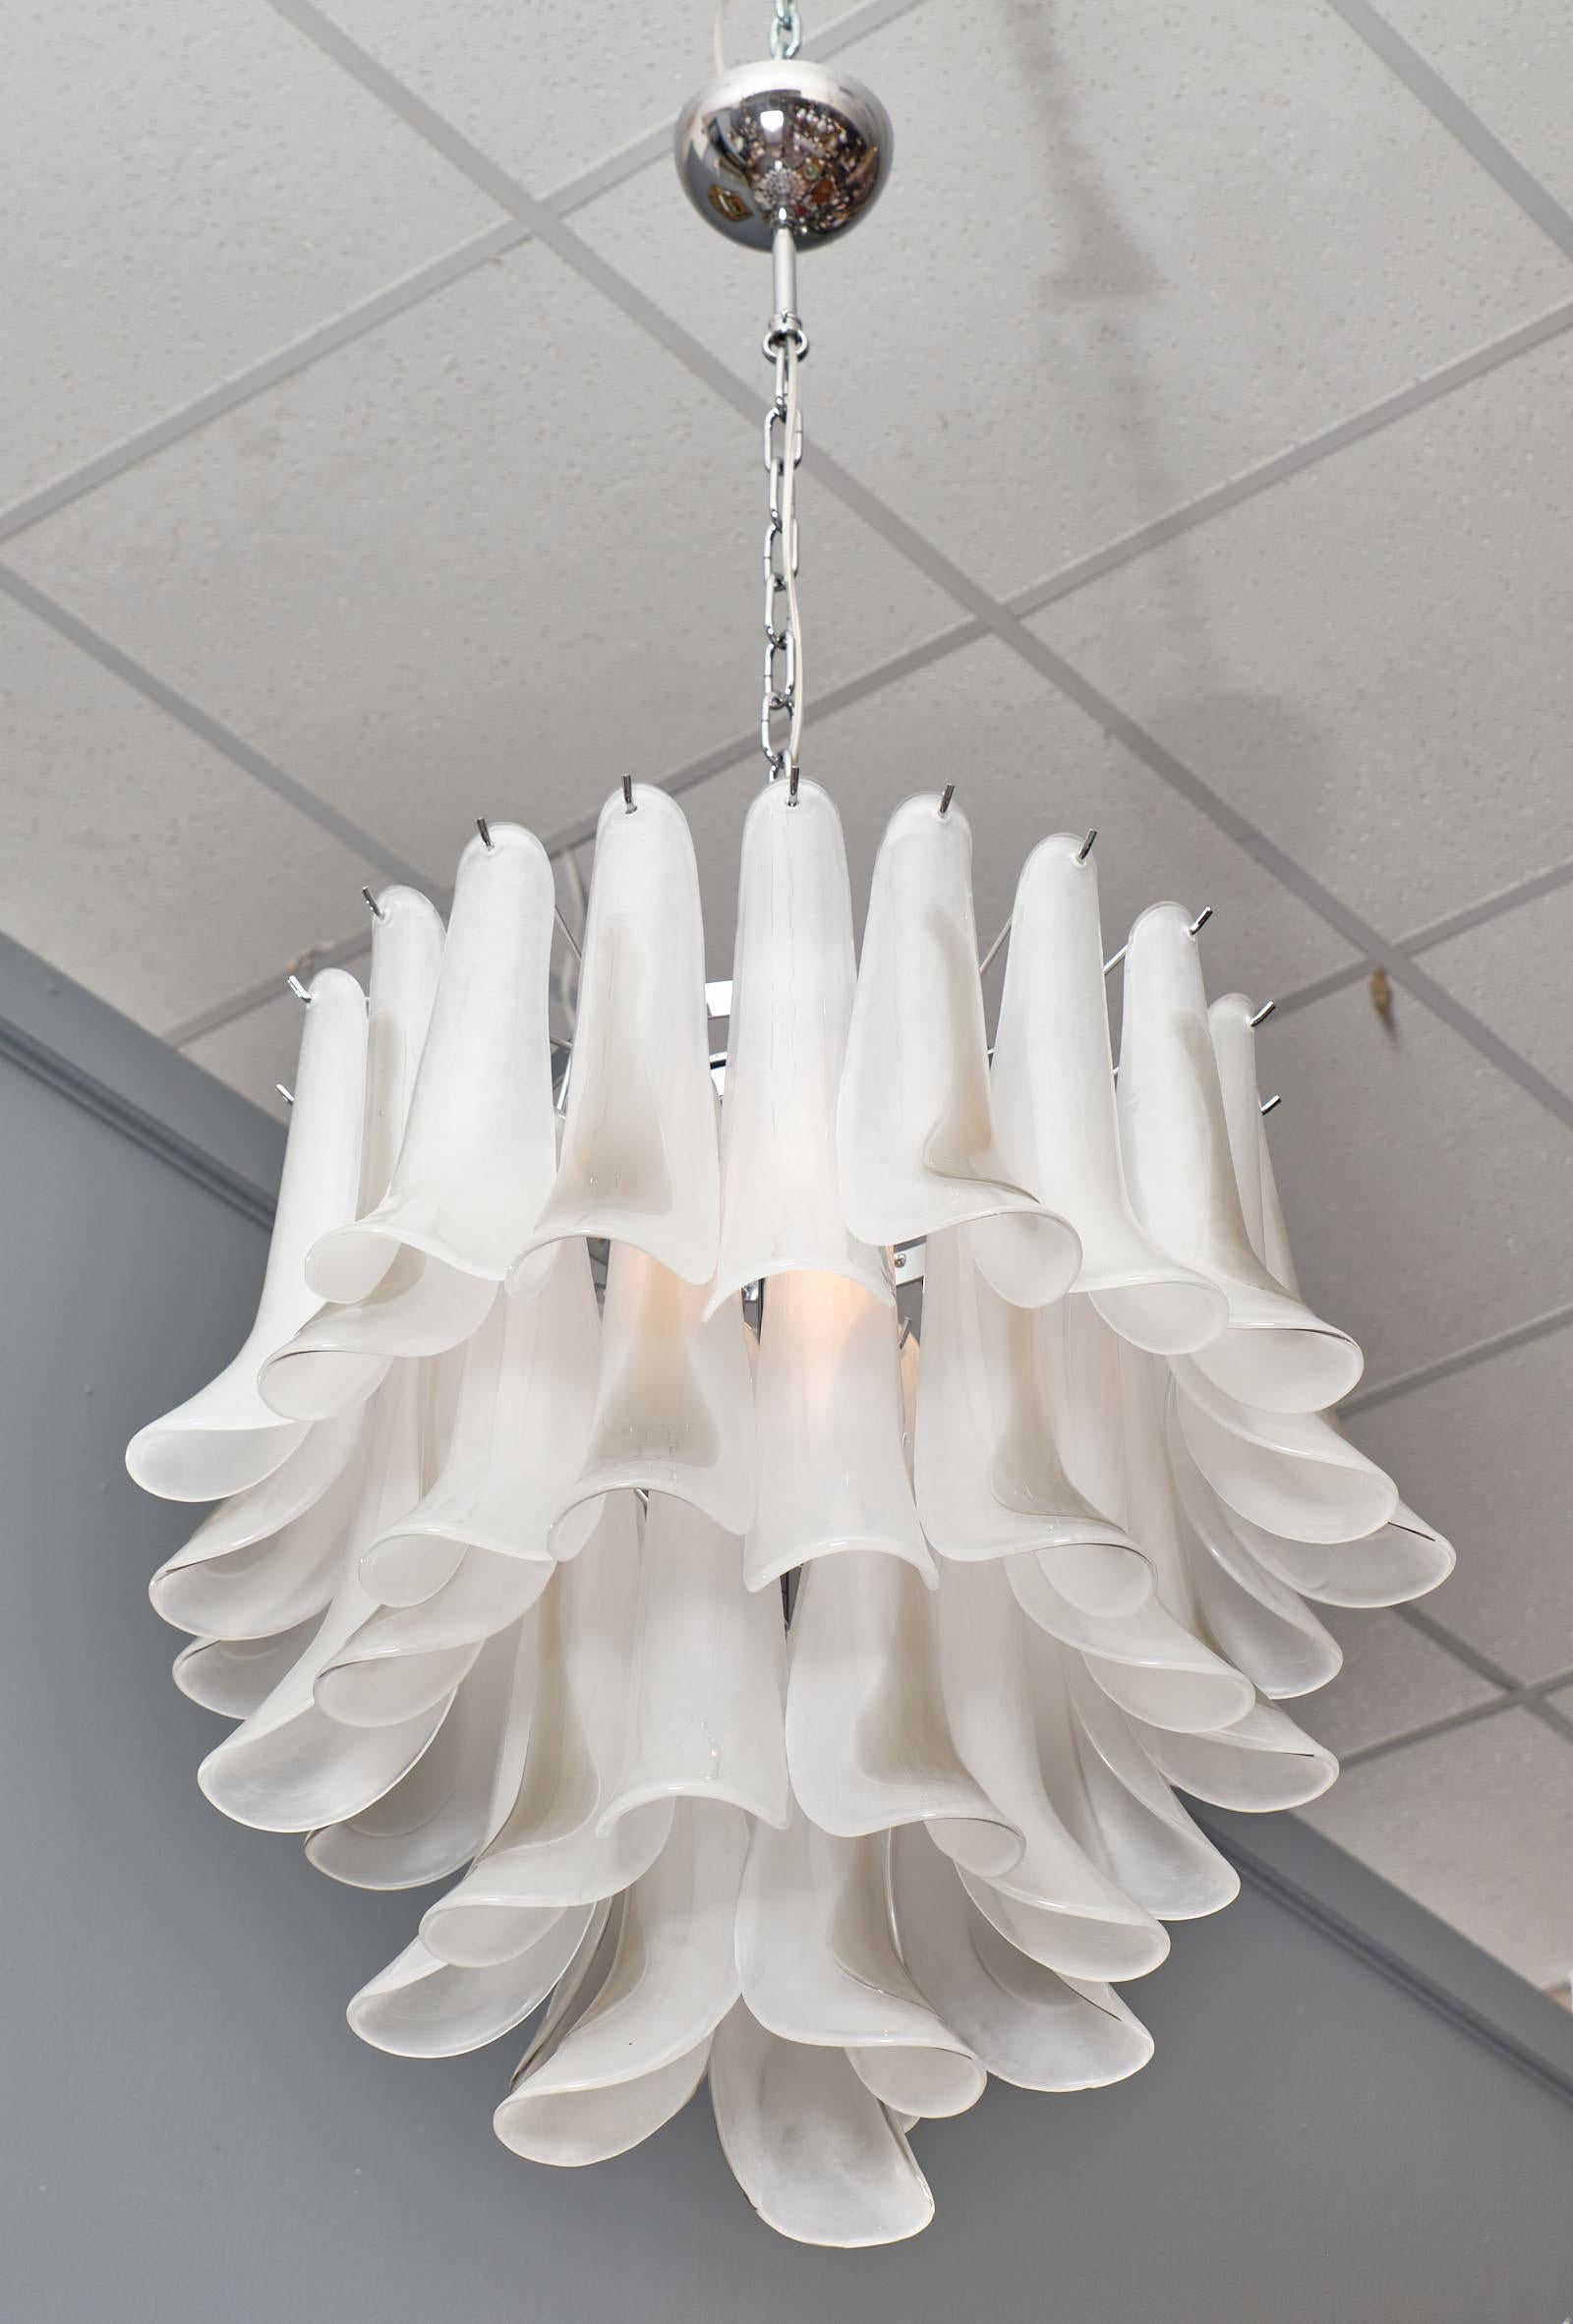 Murano glass “selle” chandelier with a chrome structure with alternating white frosted glass pendants and white frosted glass pendants with a pewter translucent layer. This piece has been newly wired to fit US standards.

This piece is currently